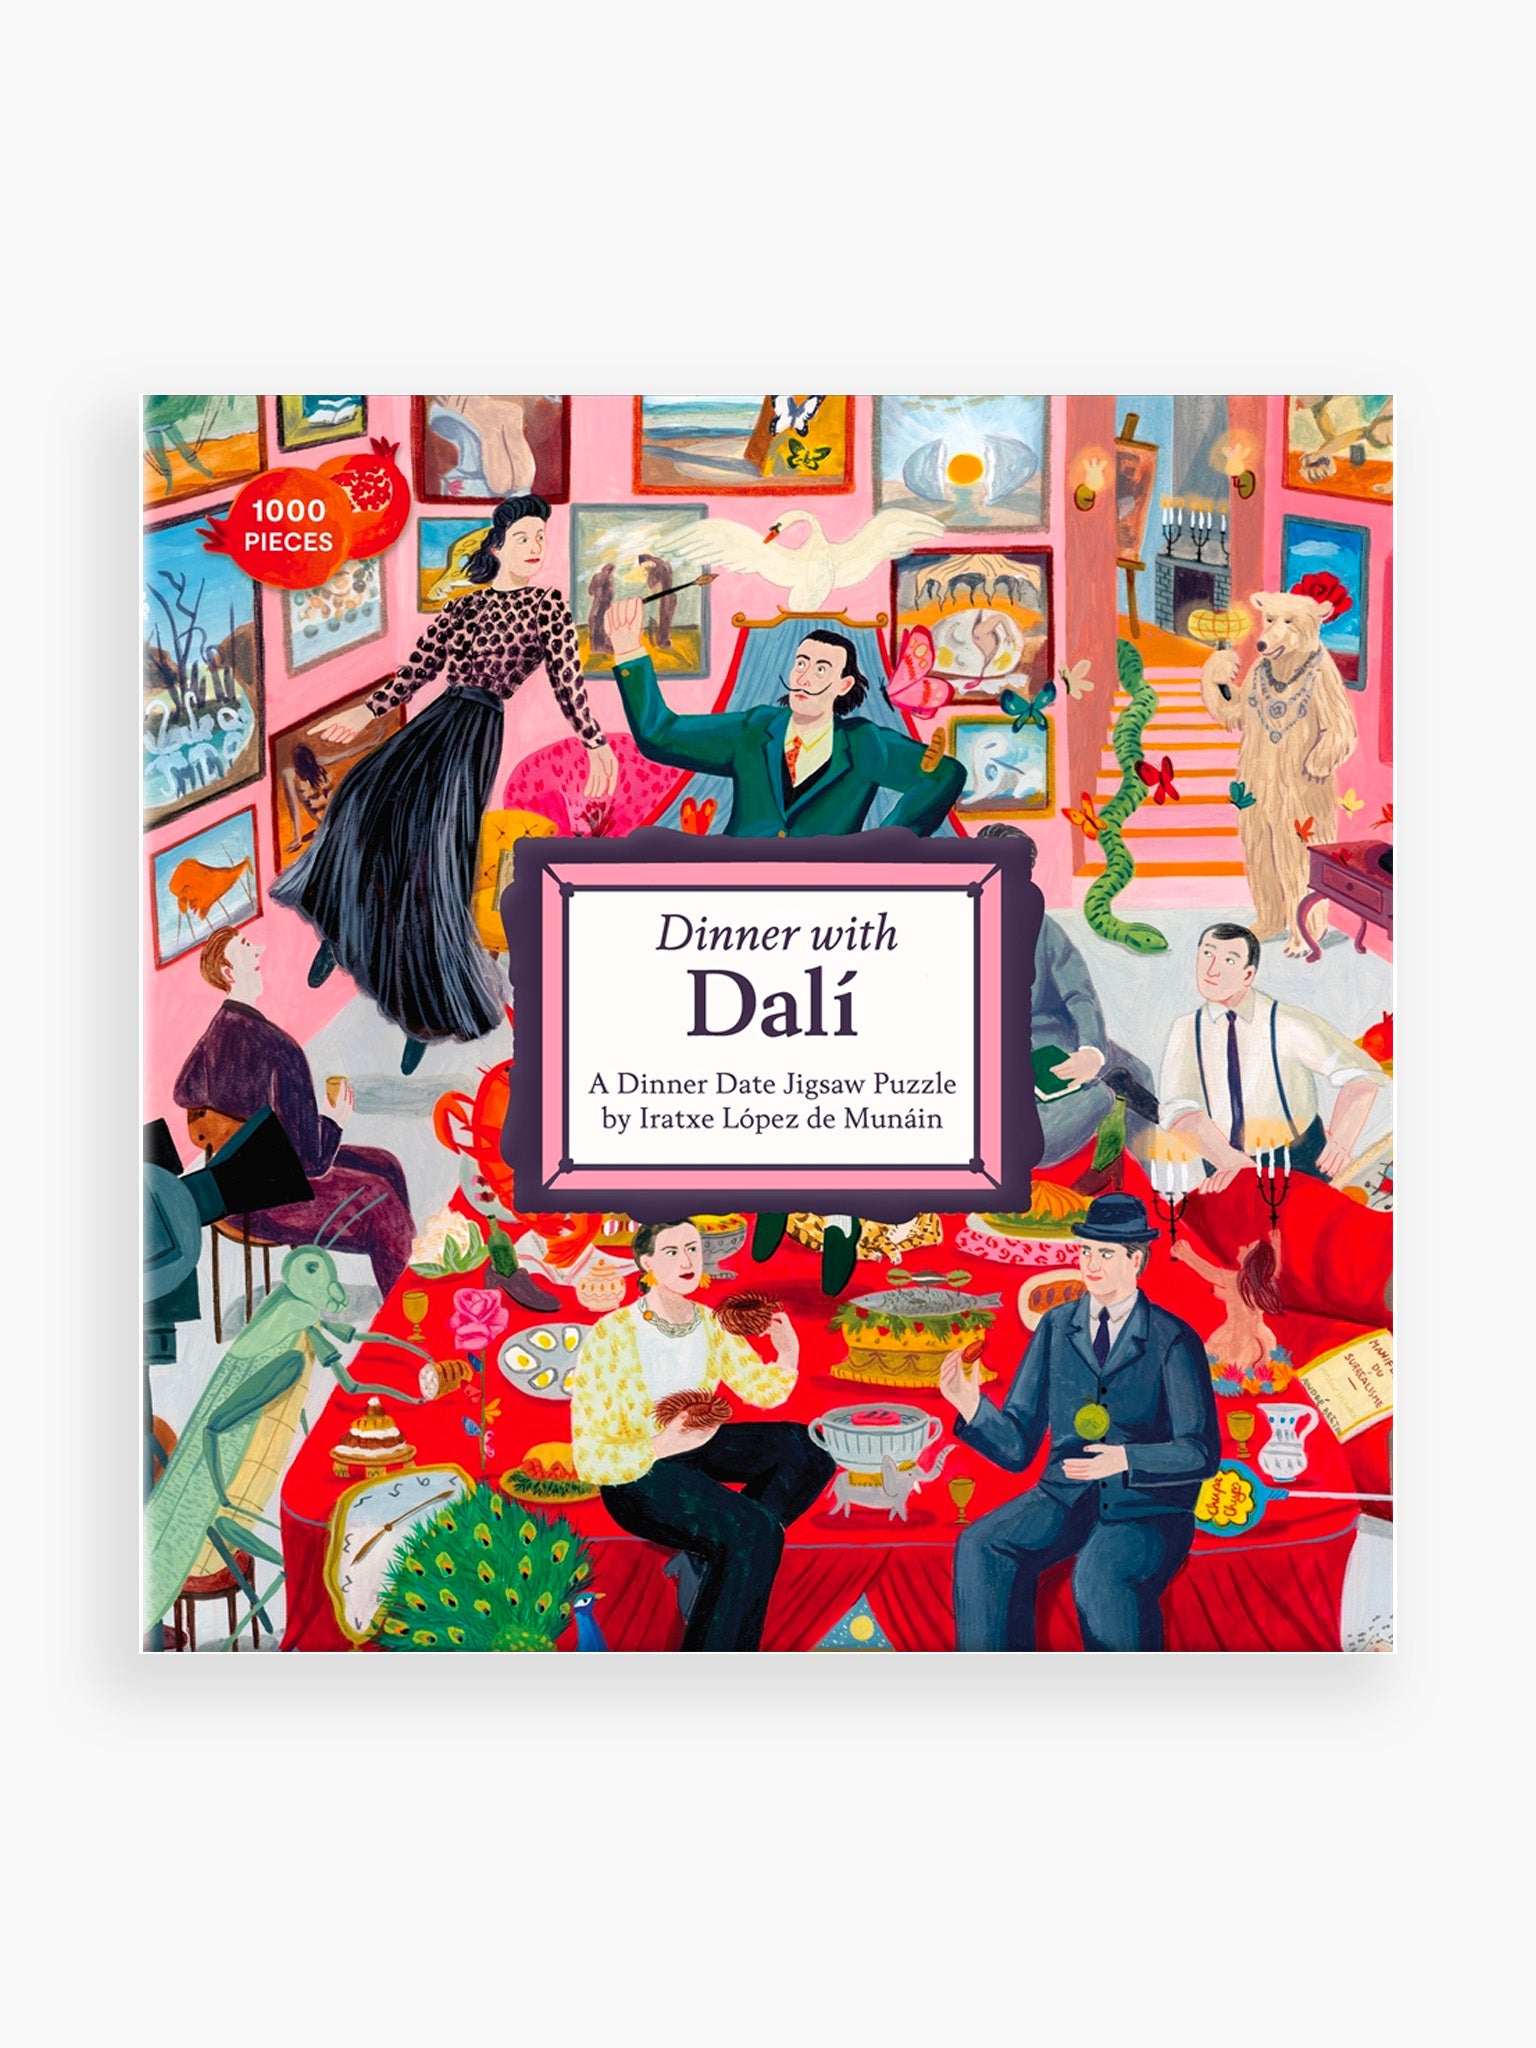 Dinner with Dali Puzzle - 1000 pcs (Pick-up Only)